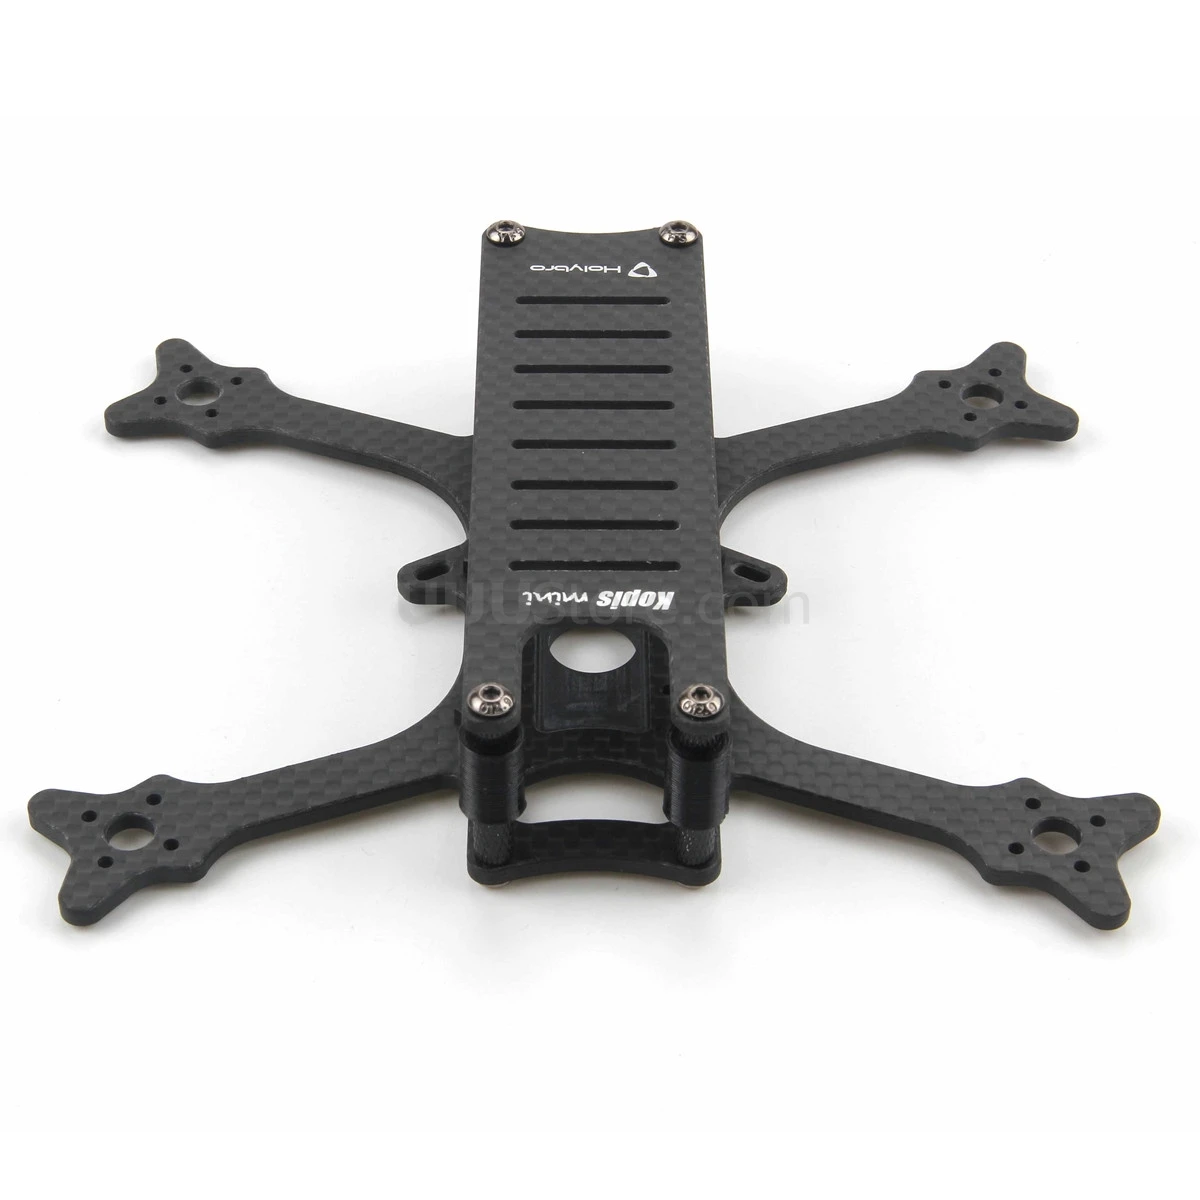 Holybro Kopis Mini Frame 148.6mm 3K Carbon Fiber 3 Inch for Drone FPV Racing RC Quadcopter Multicopter Multirotor Spare Parts 5